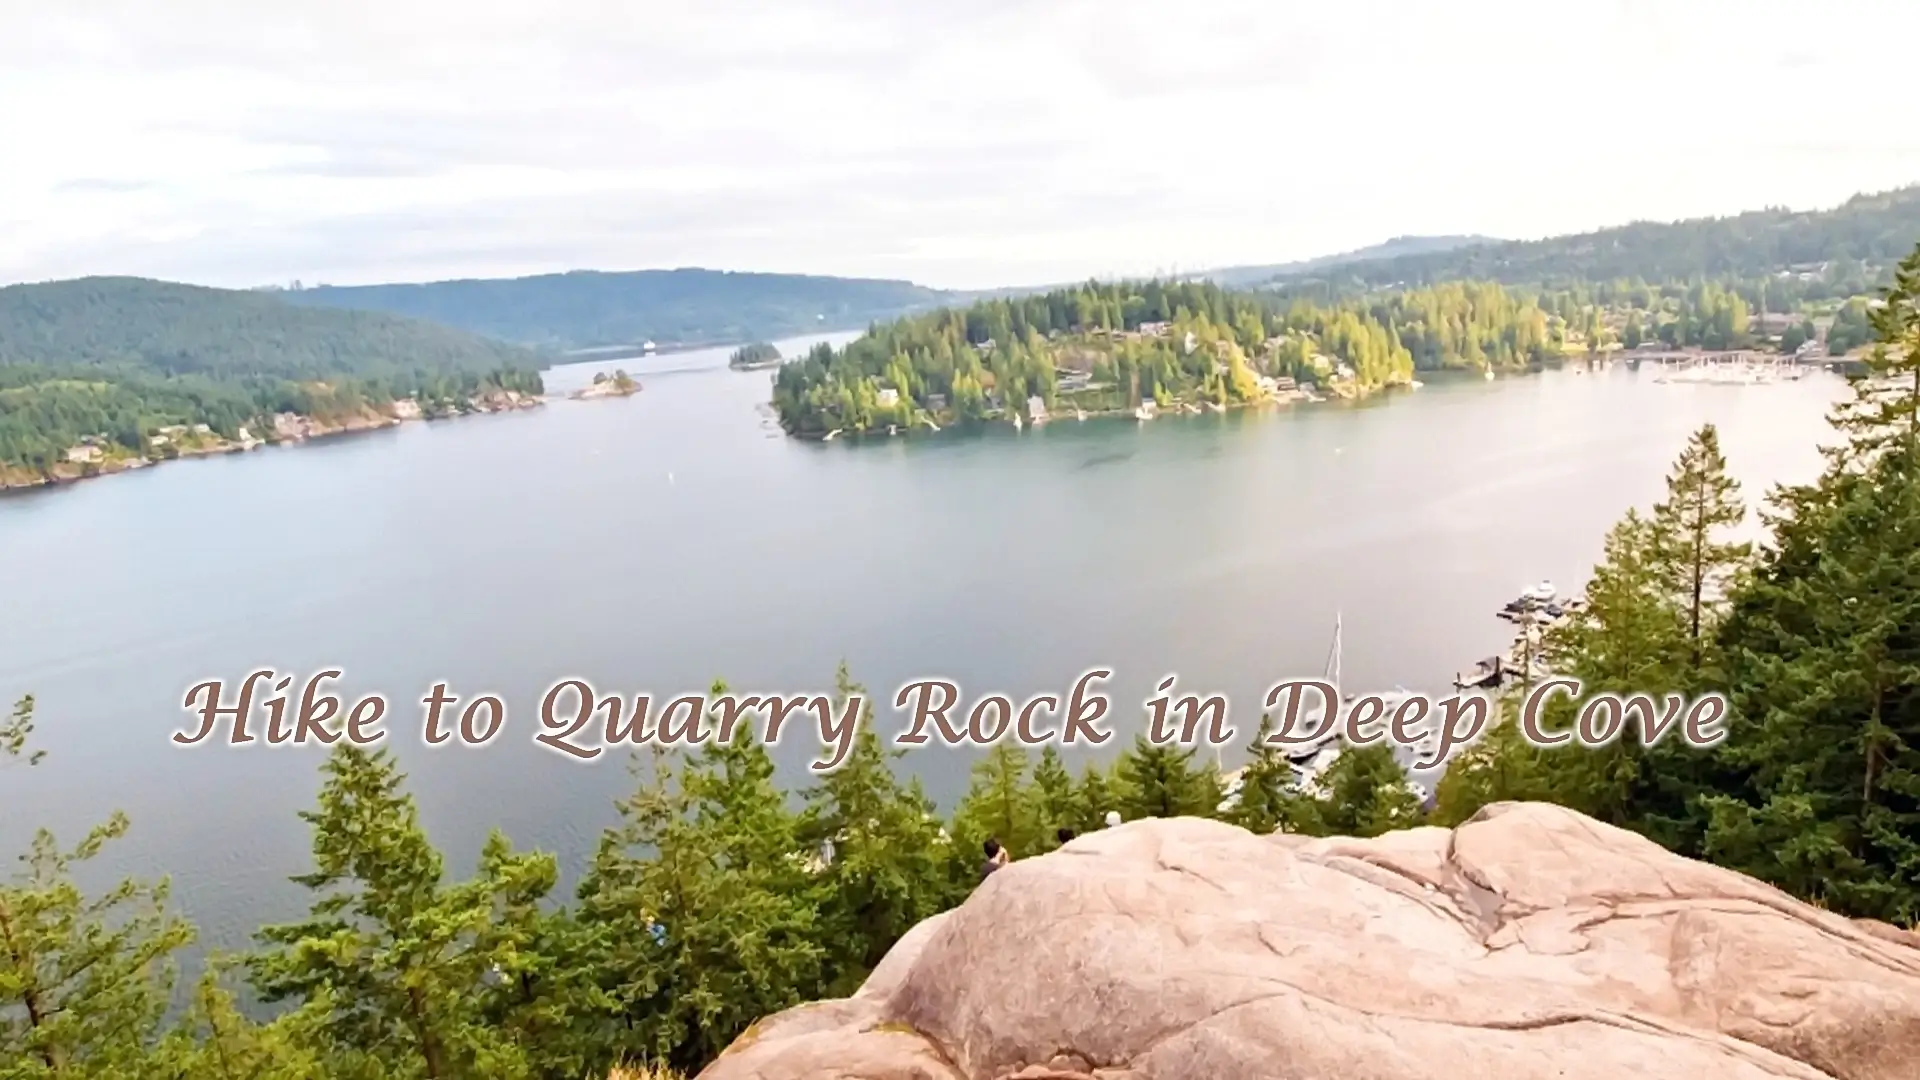 hike to Quarry Rock in Deep Cove is an excellent choice